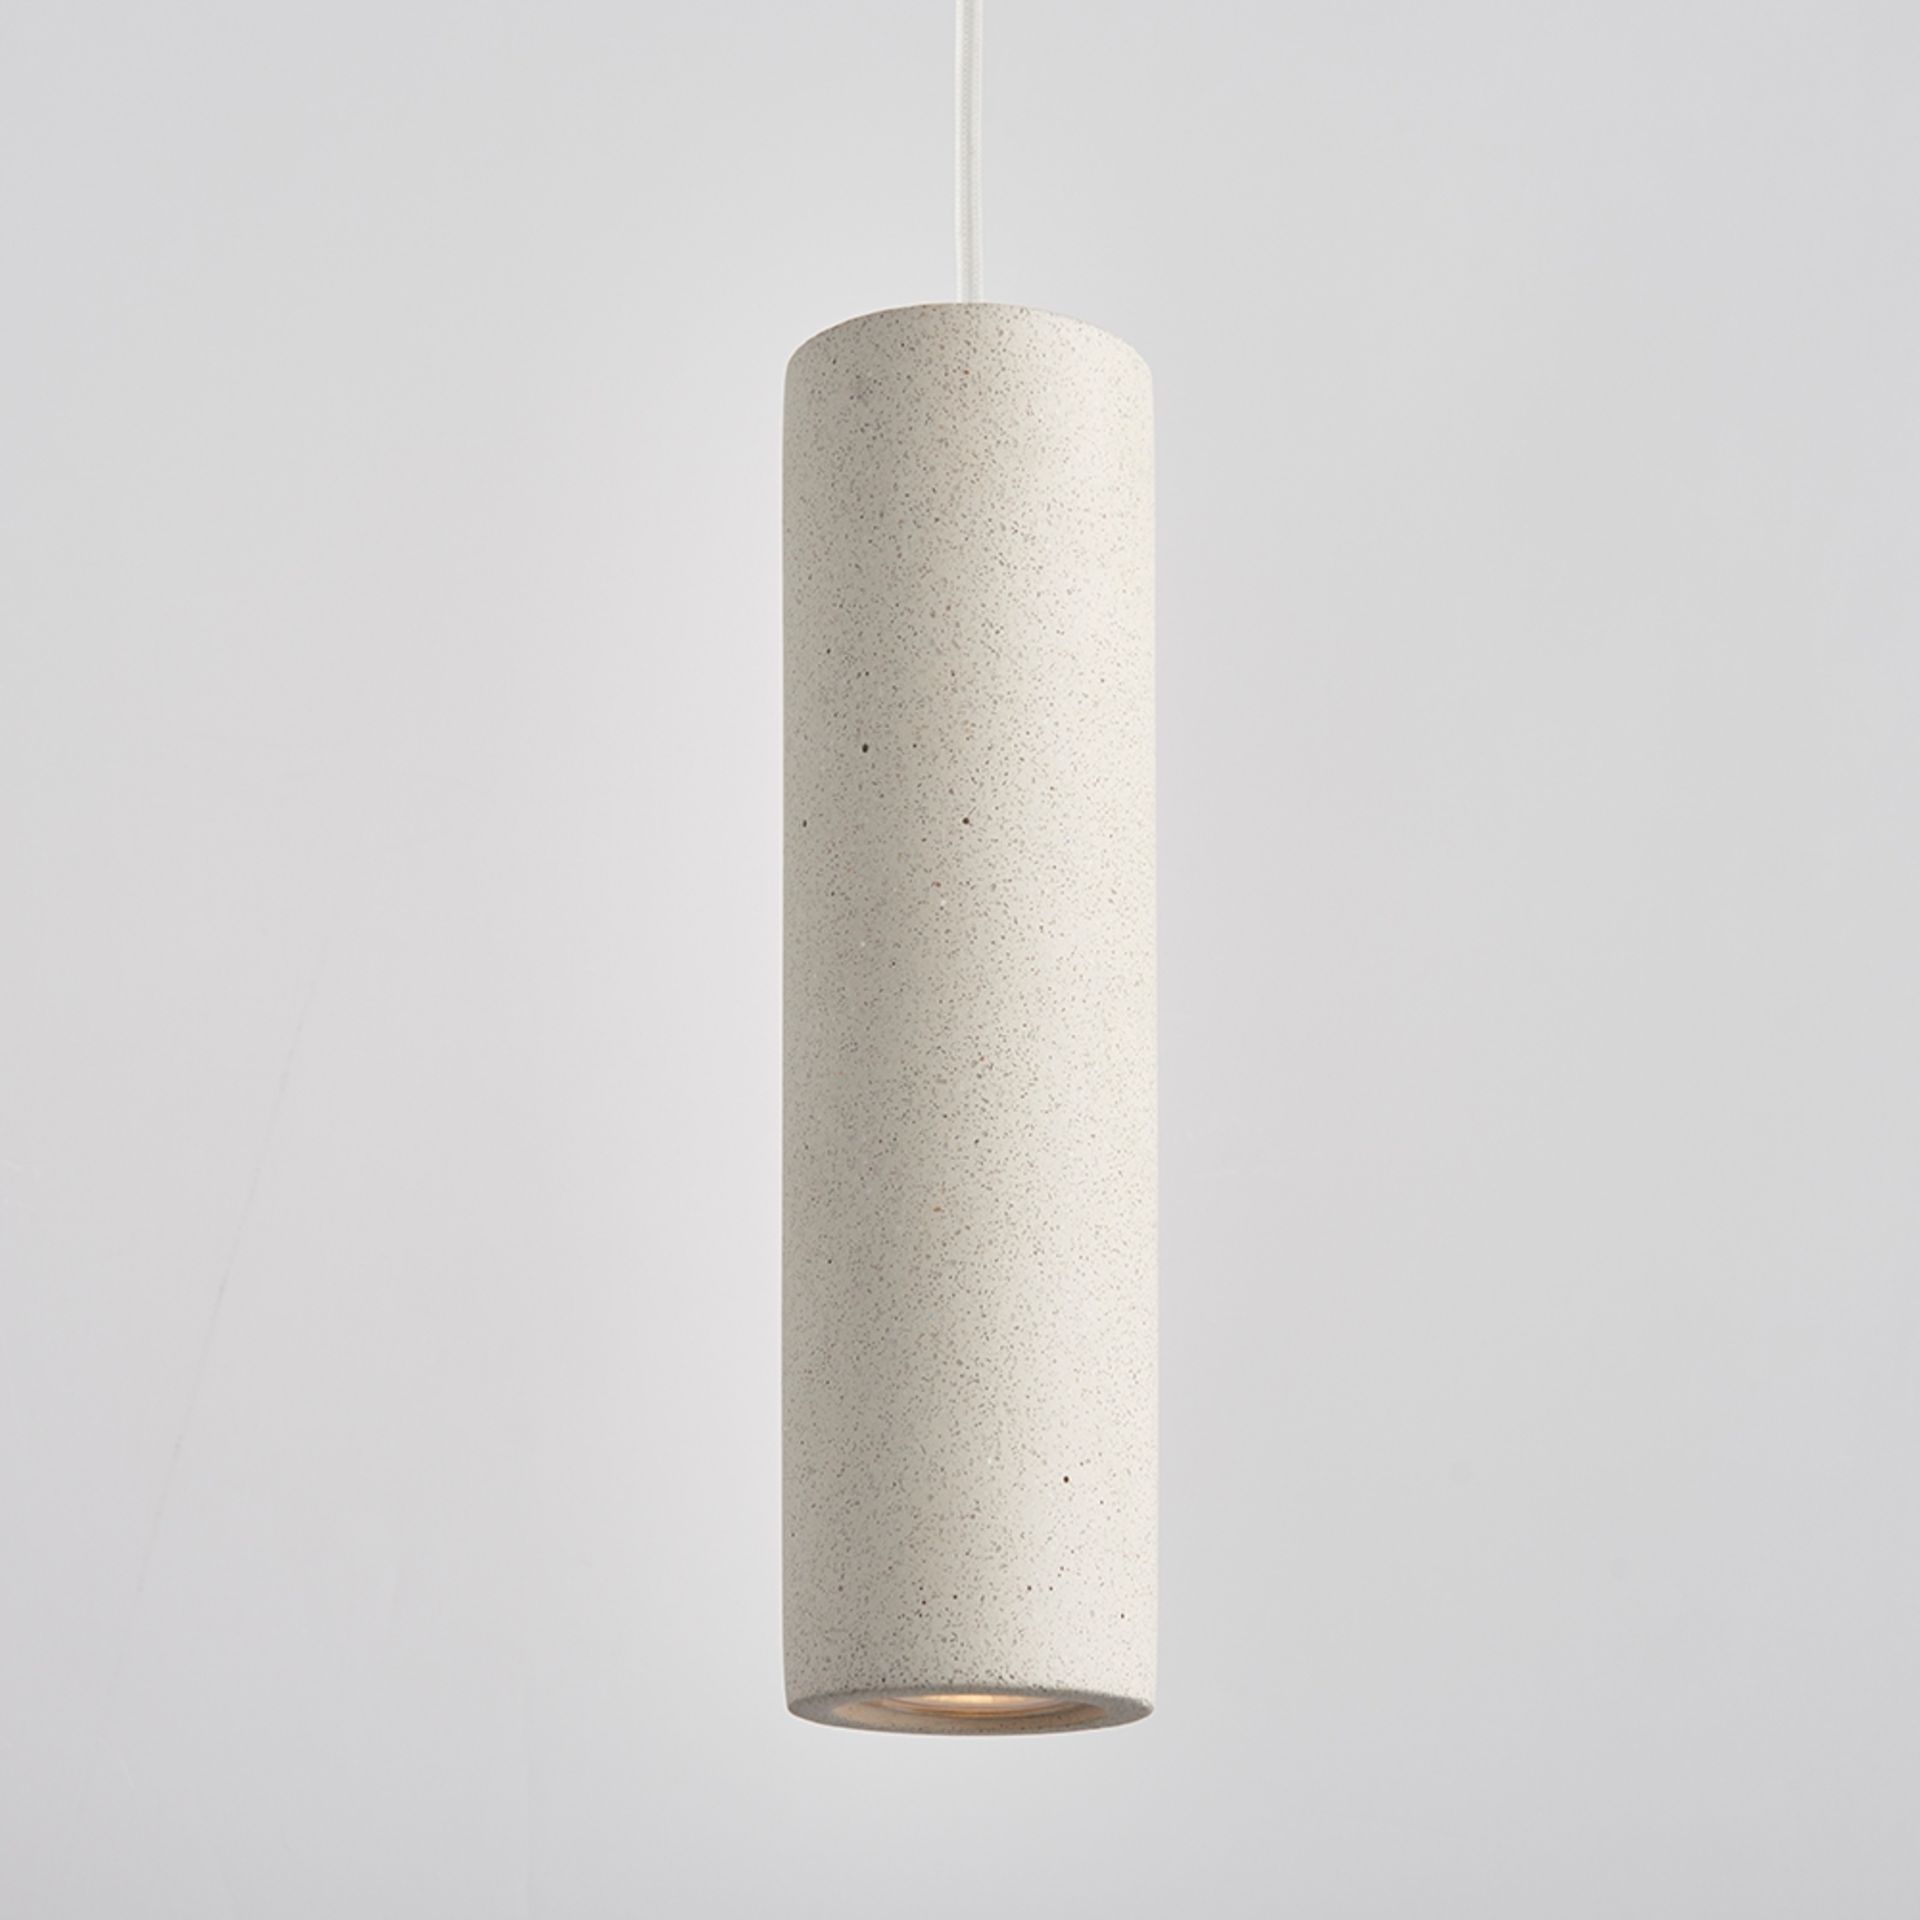 Endon Lighting Architectural inspired white sandstone concrete finish pendant, suspended from - Image 4 of 5